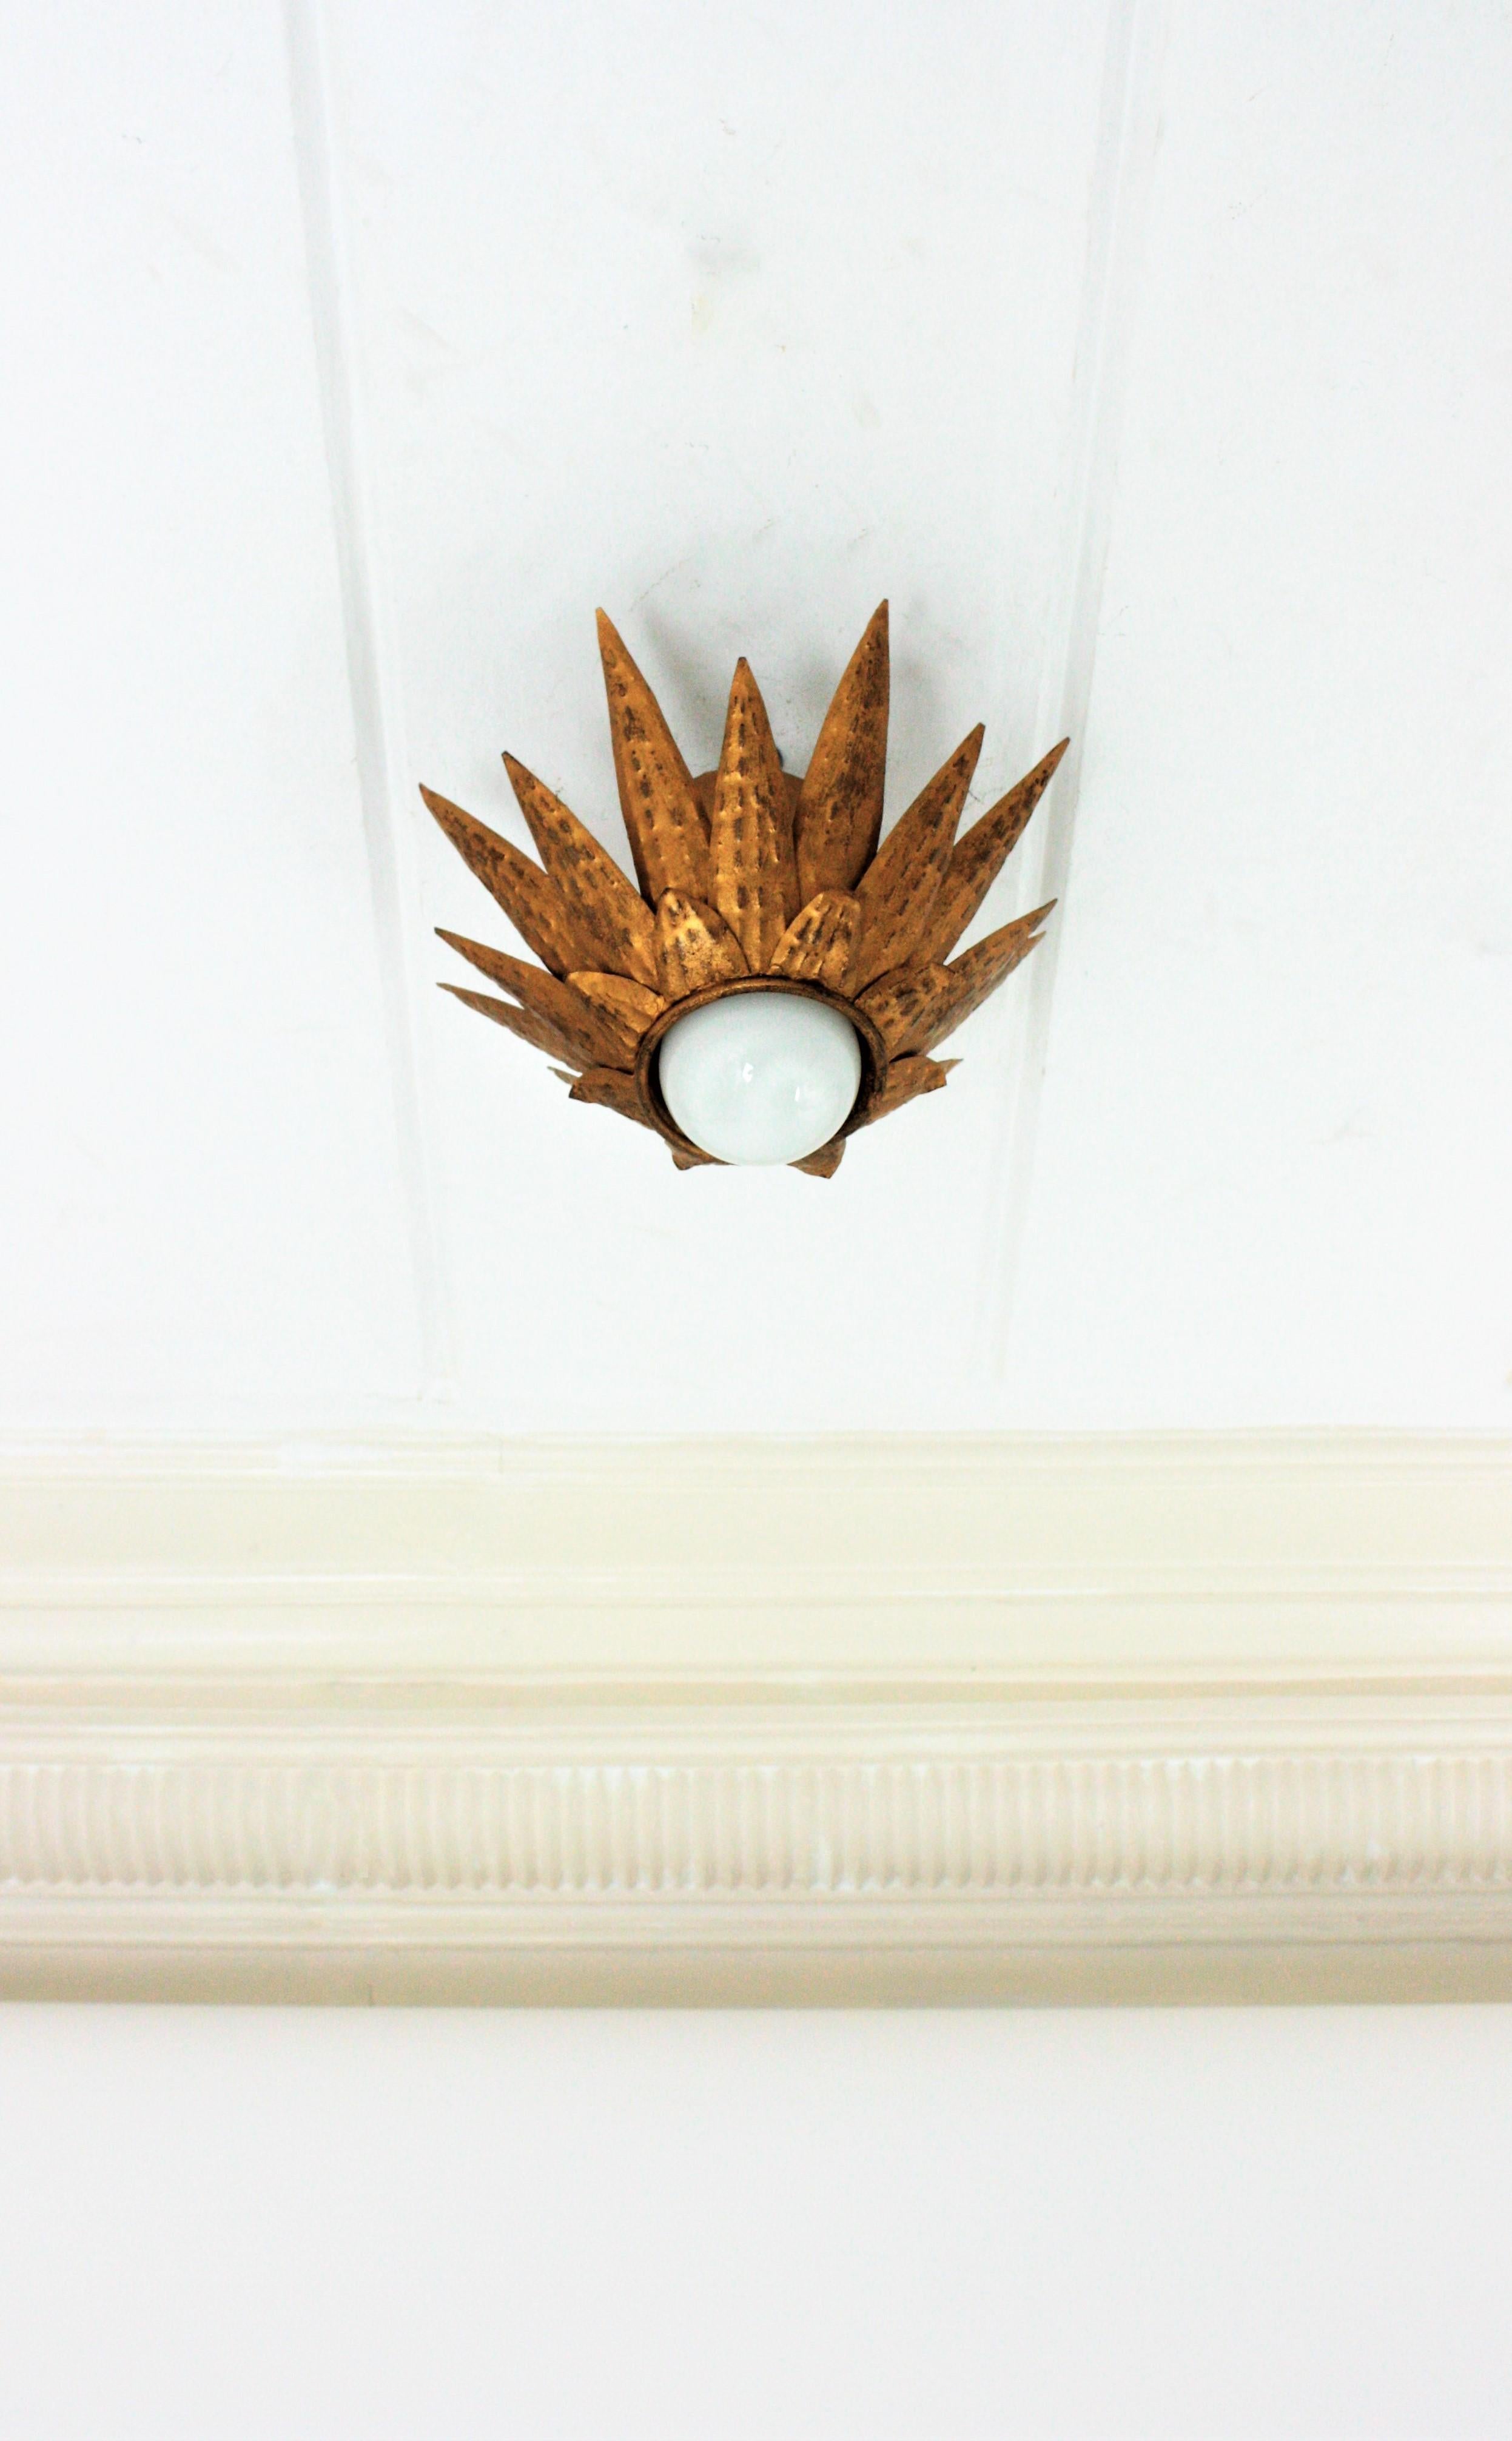 Brutalist sunburst starburst light fixture, iron, gold leaf, France, 1950s
This triple layered flush mount has a richly hammer work thorough. It has a terrific aged patina showing its original gold leaf gilding.
This starburst ceiling light can be